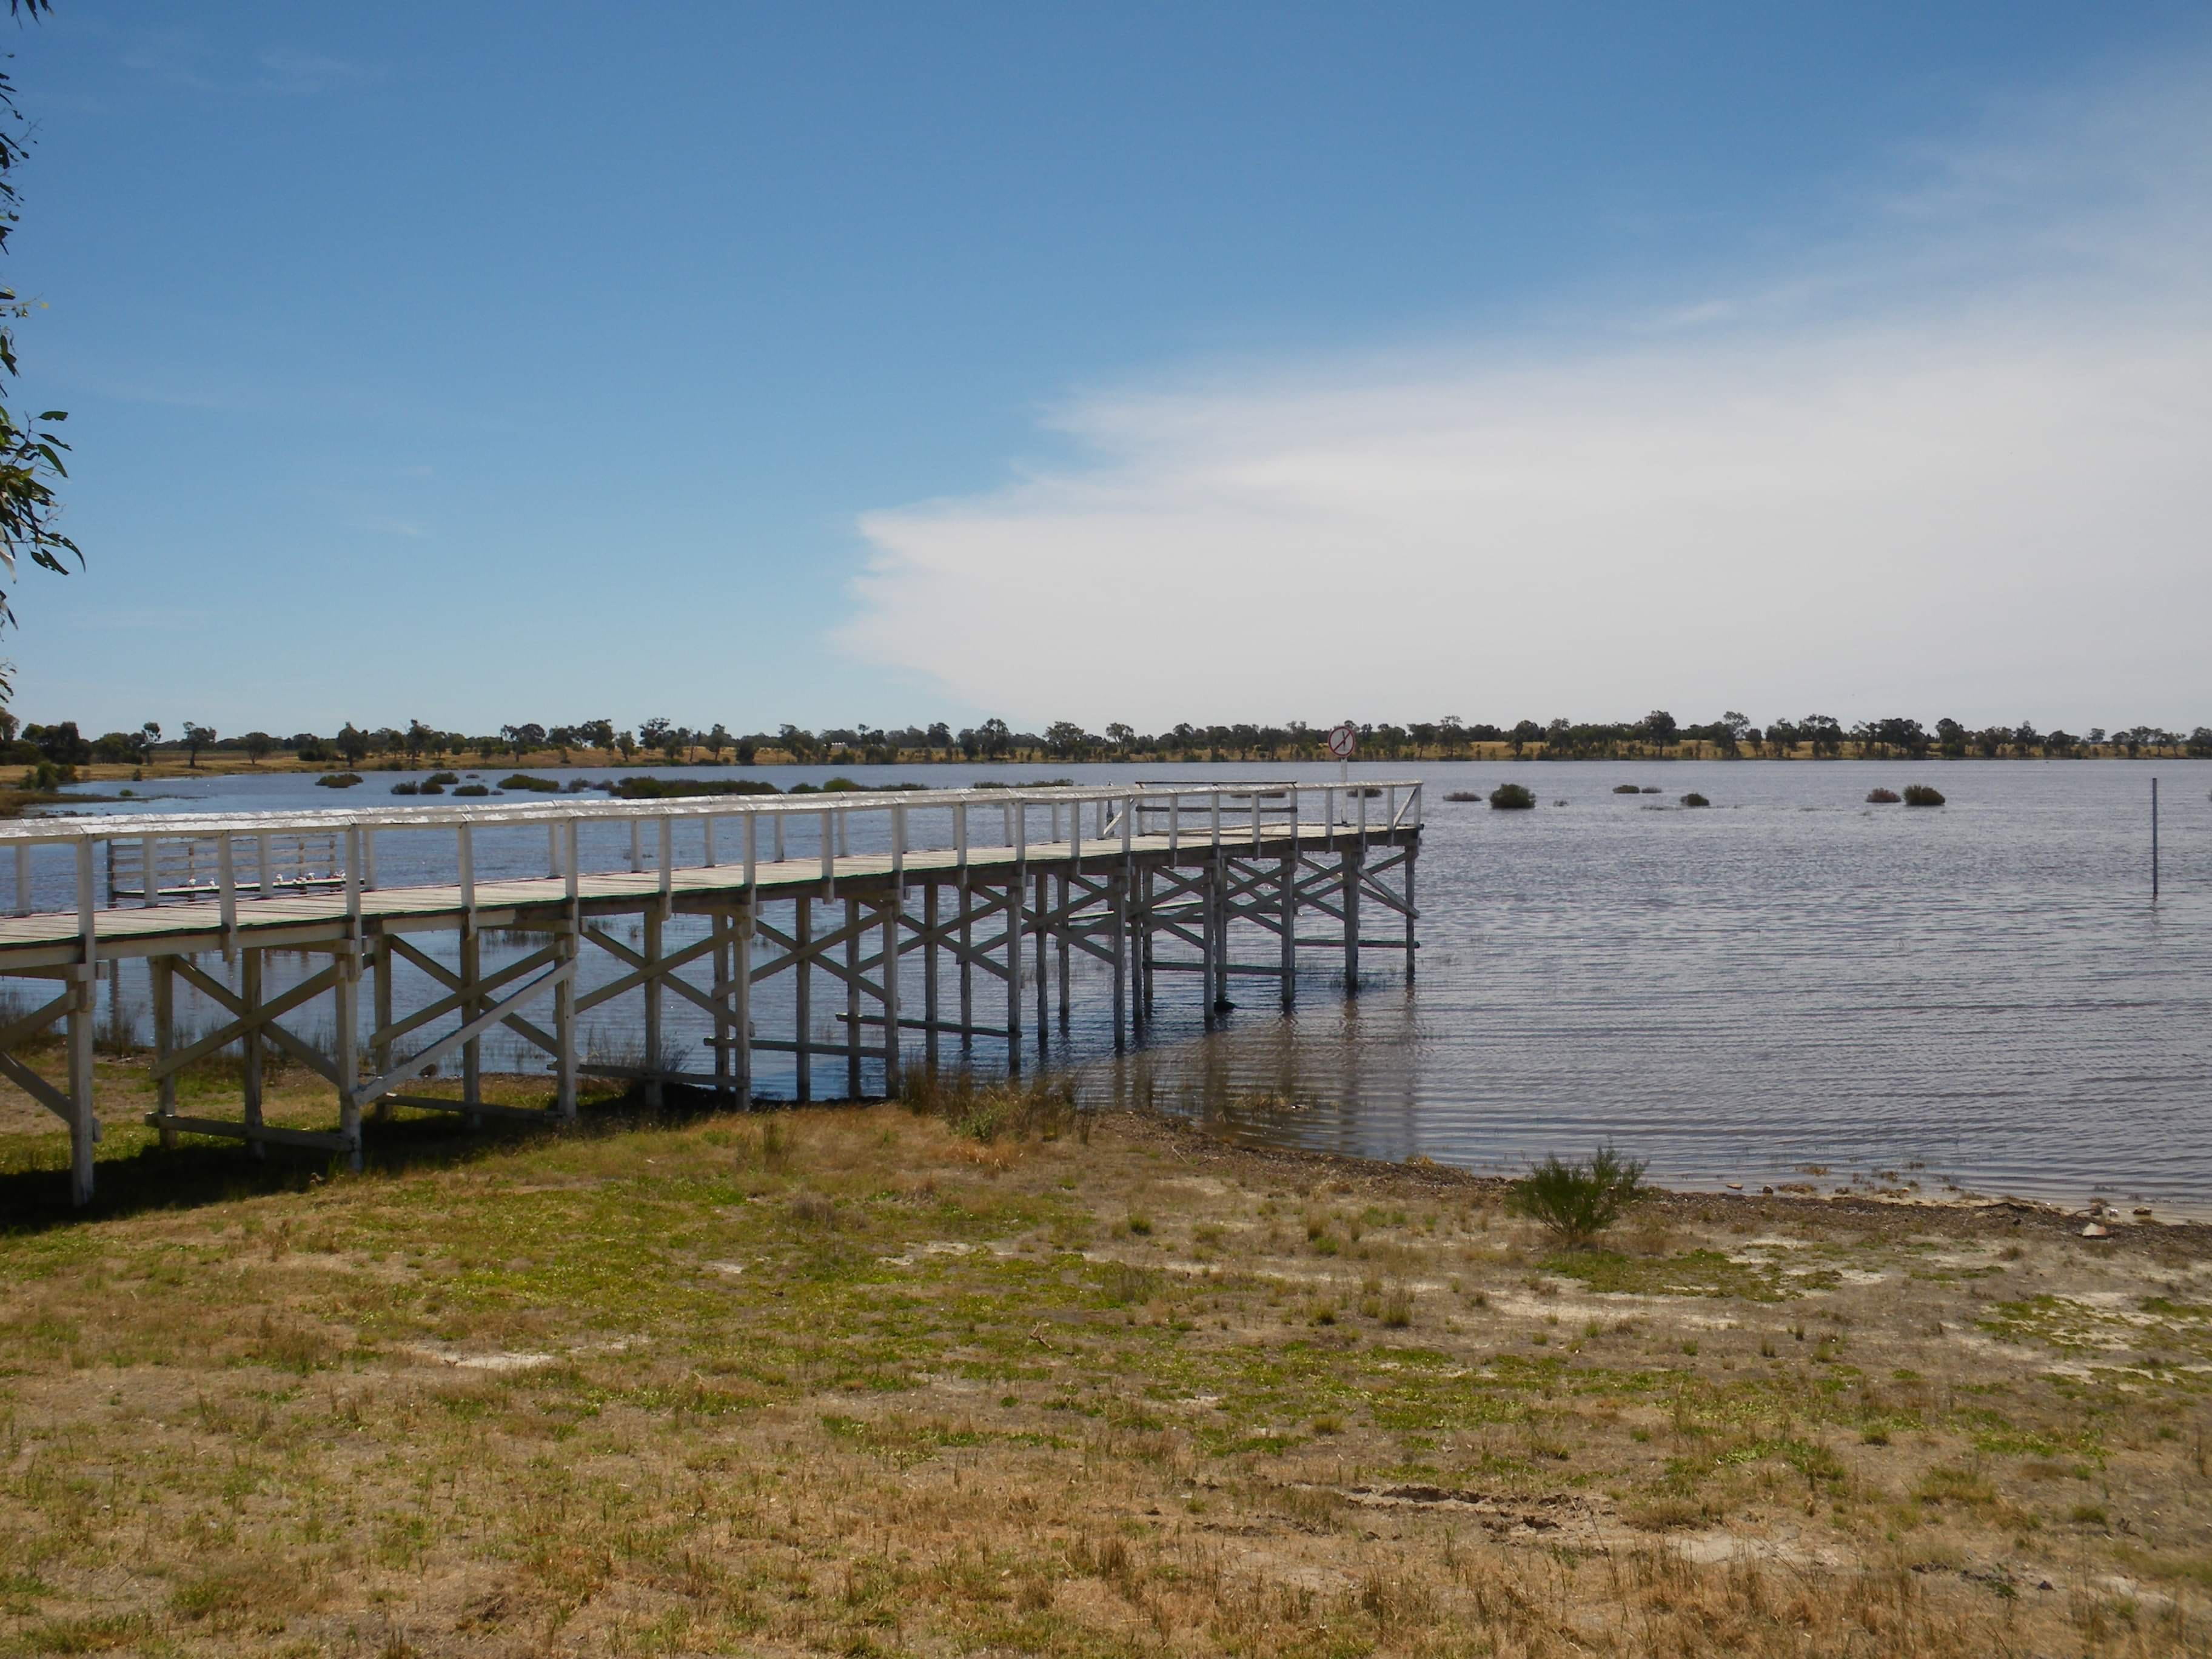 A pier, stretching out into a lake, with an open grassy area in front.